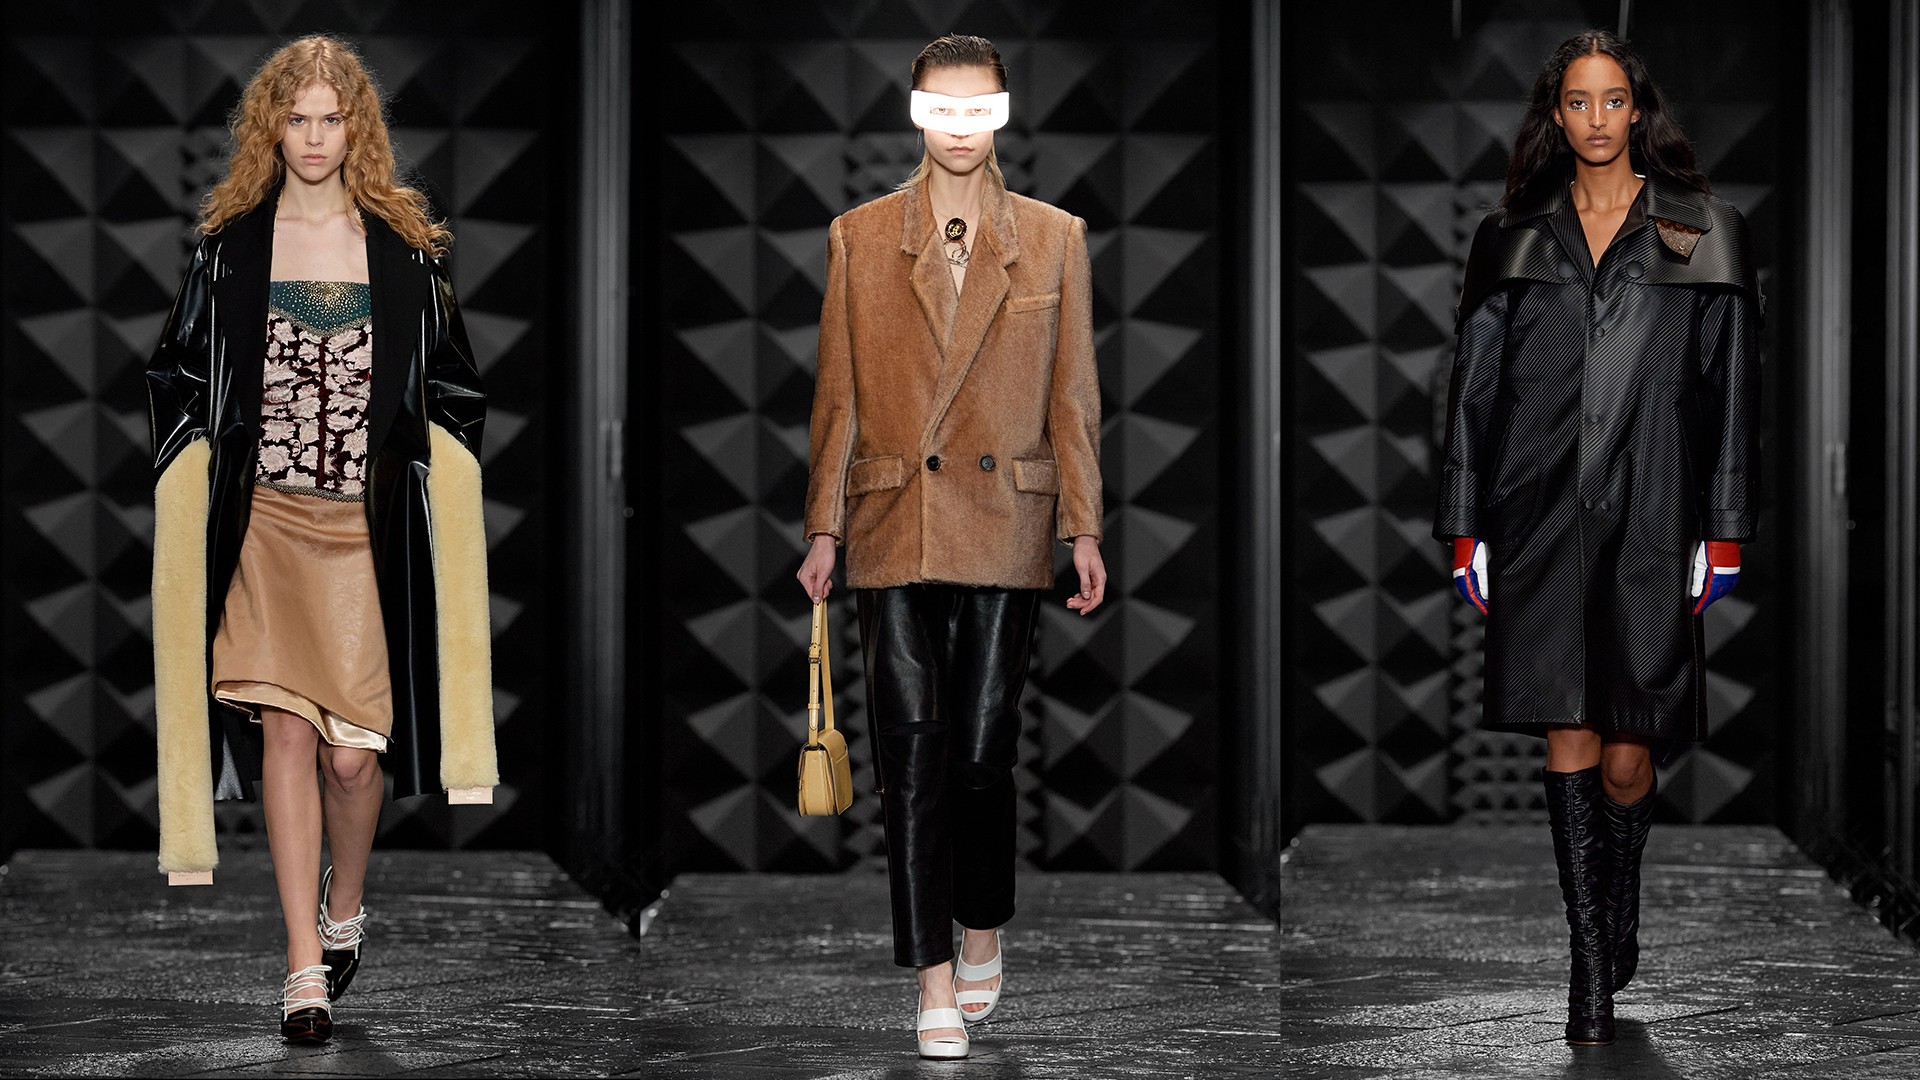 Louis Vuitton Celebrates France With Womenswear, From French Horns